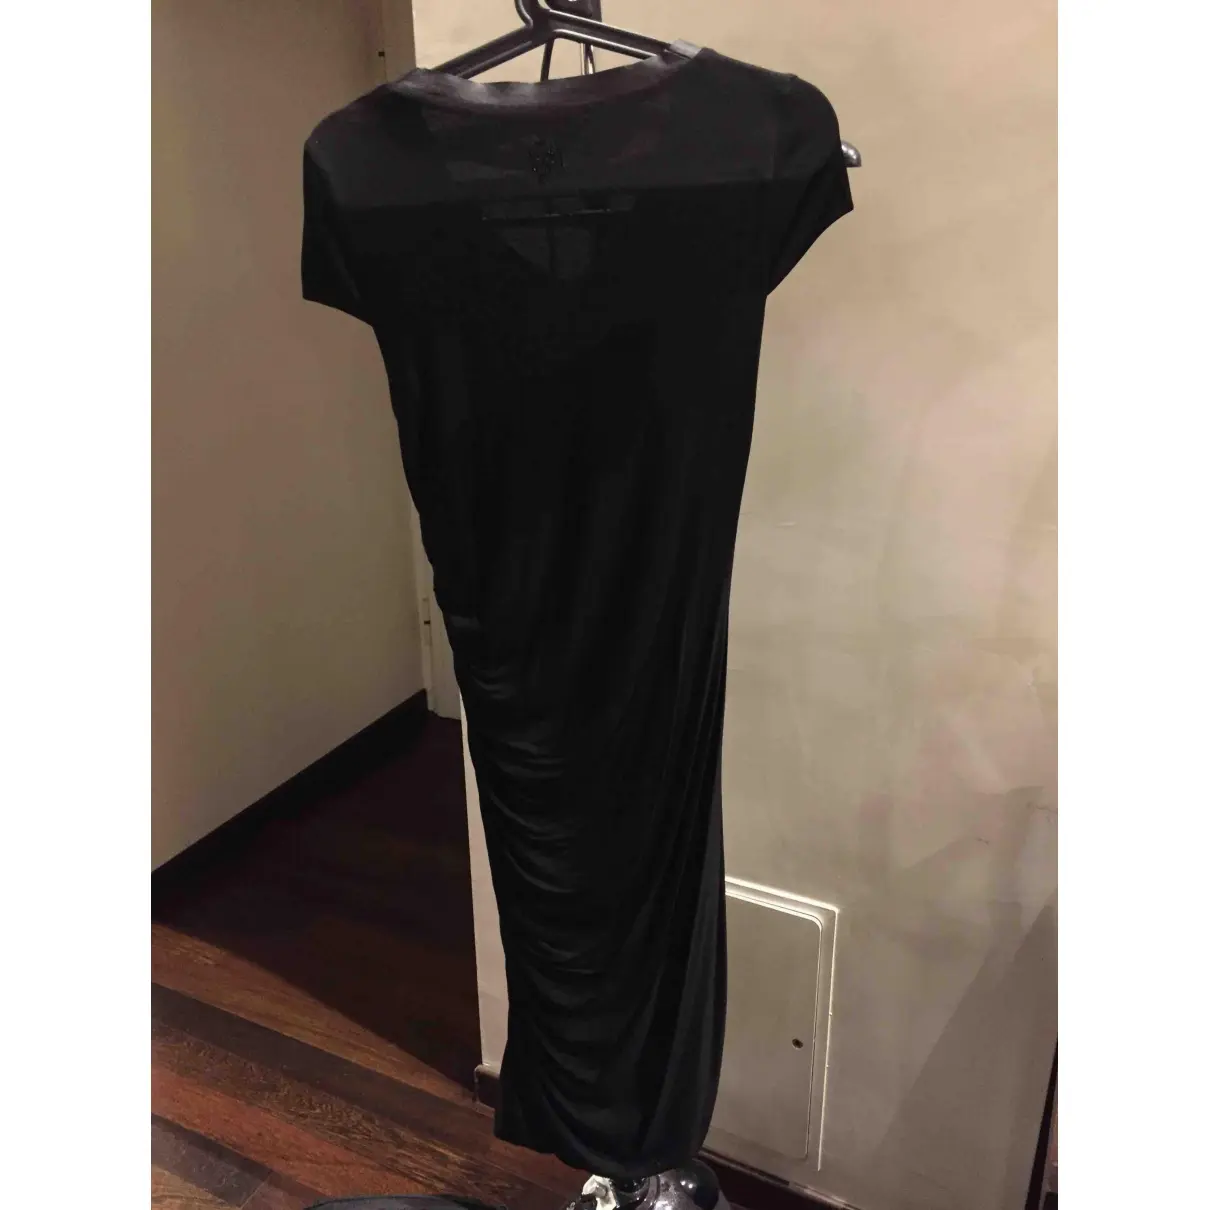 GUESS Mini dress for sale